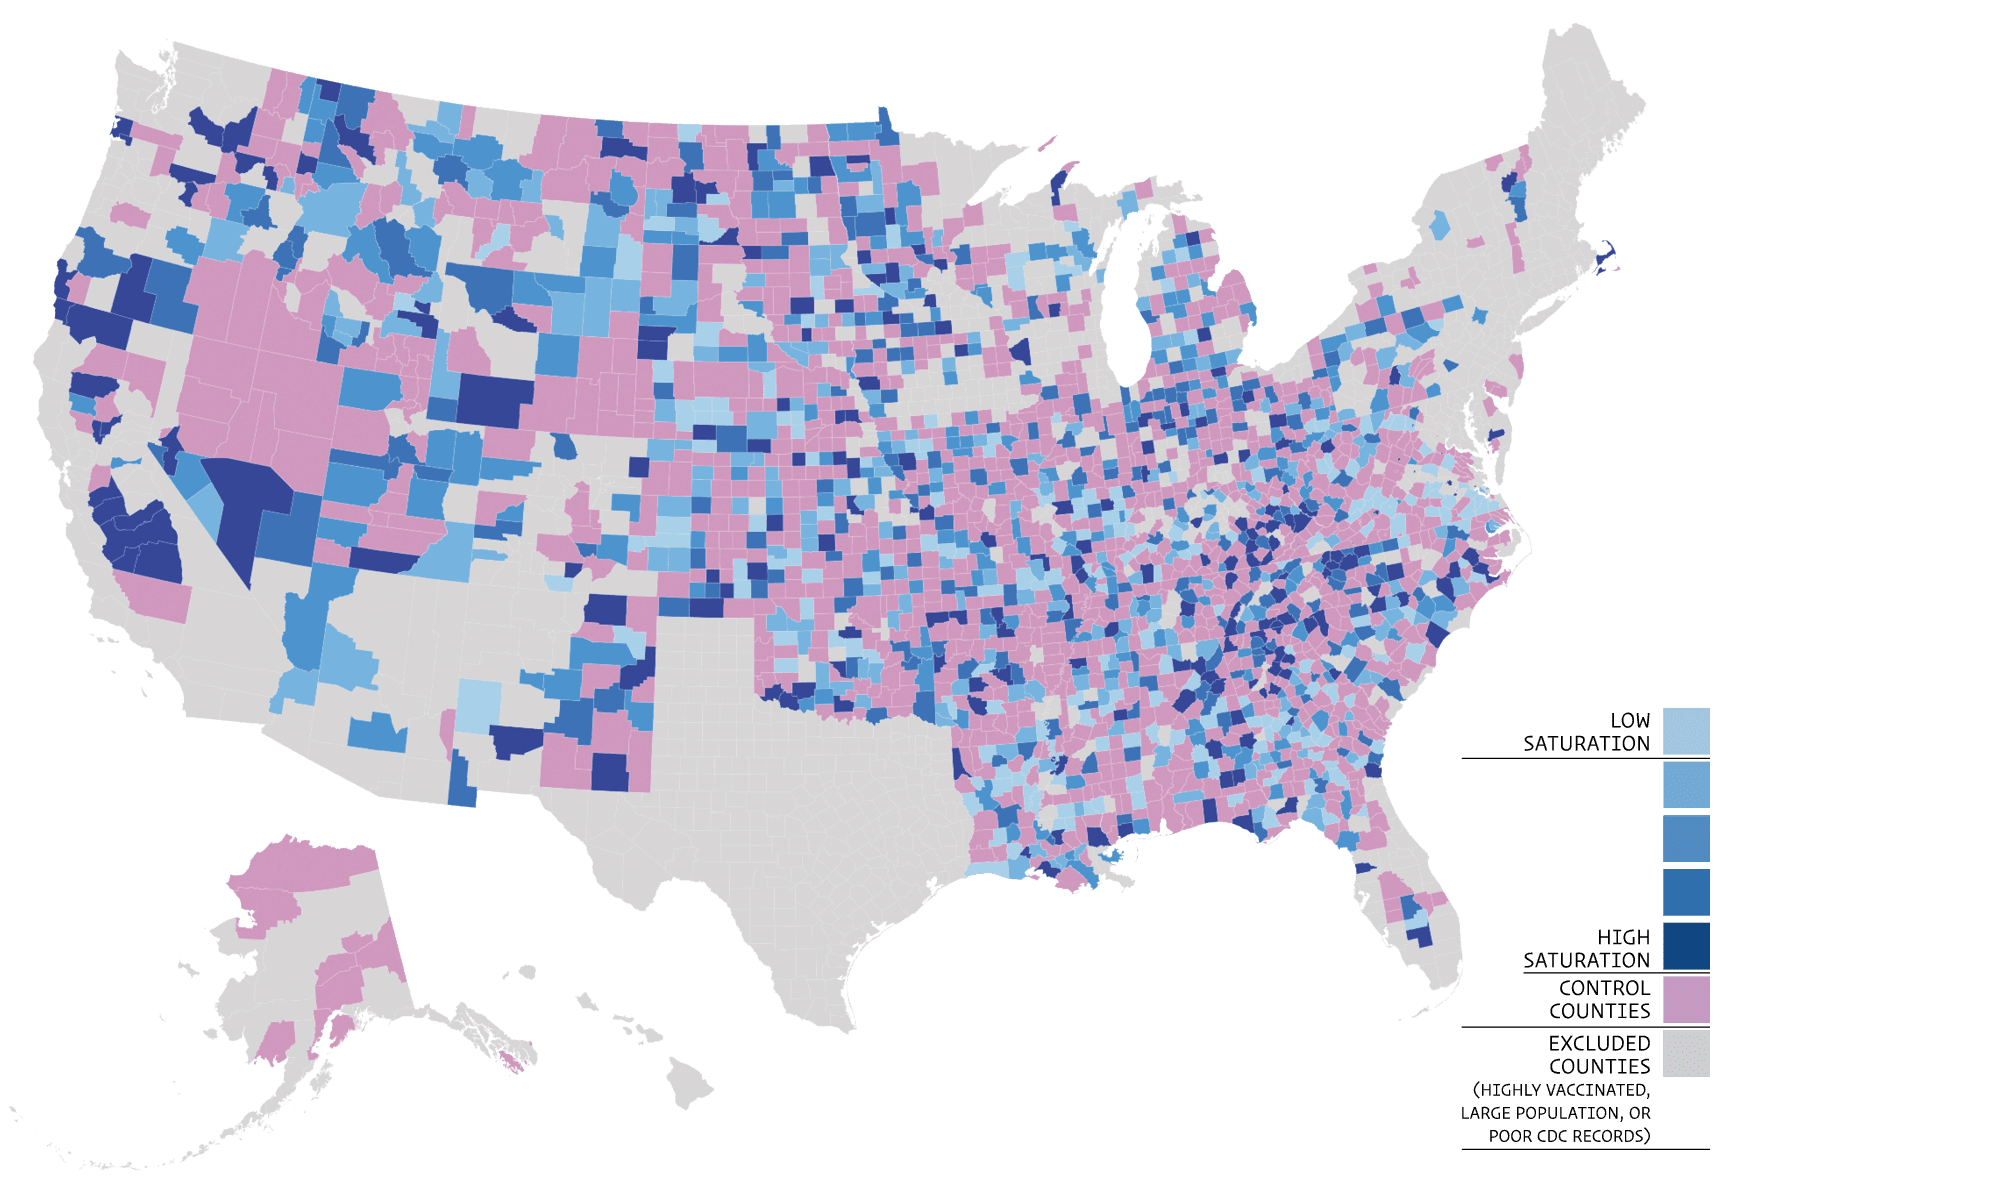 Map of the United States with counties colored to show one of the following: low saturation, high saturation, control counties, or excluded counties (because of high vaccination rates, large population, or poor CDC records).